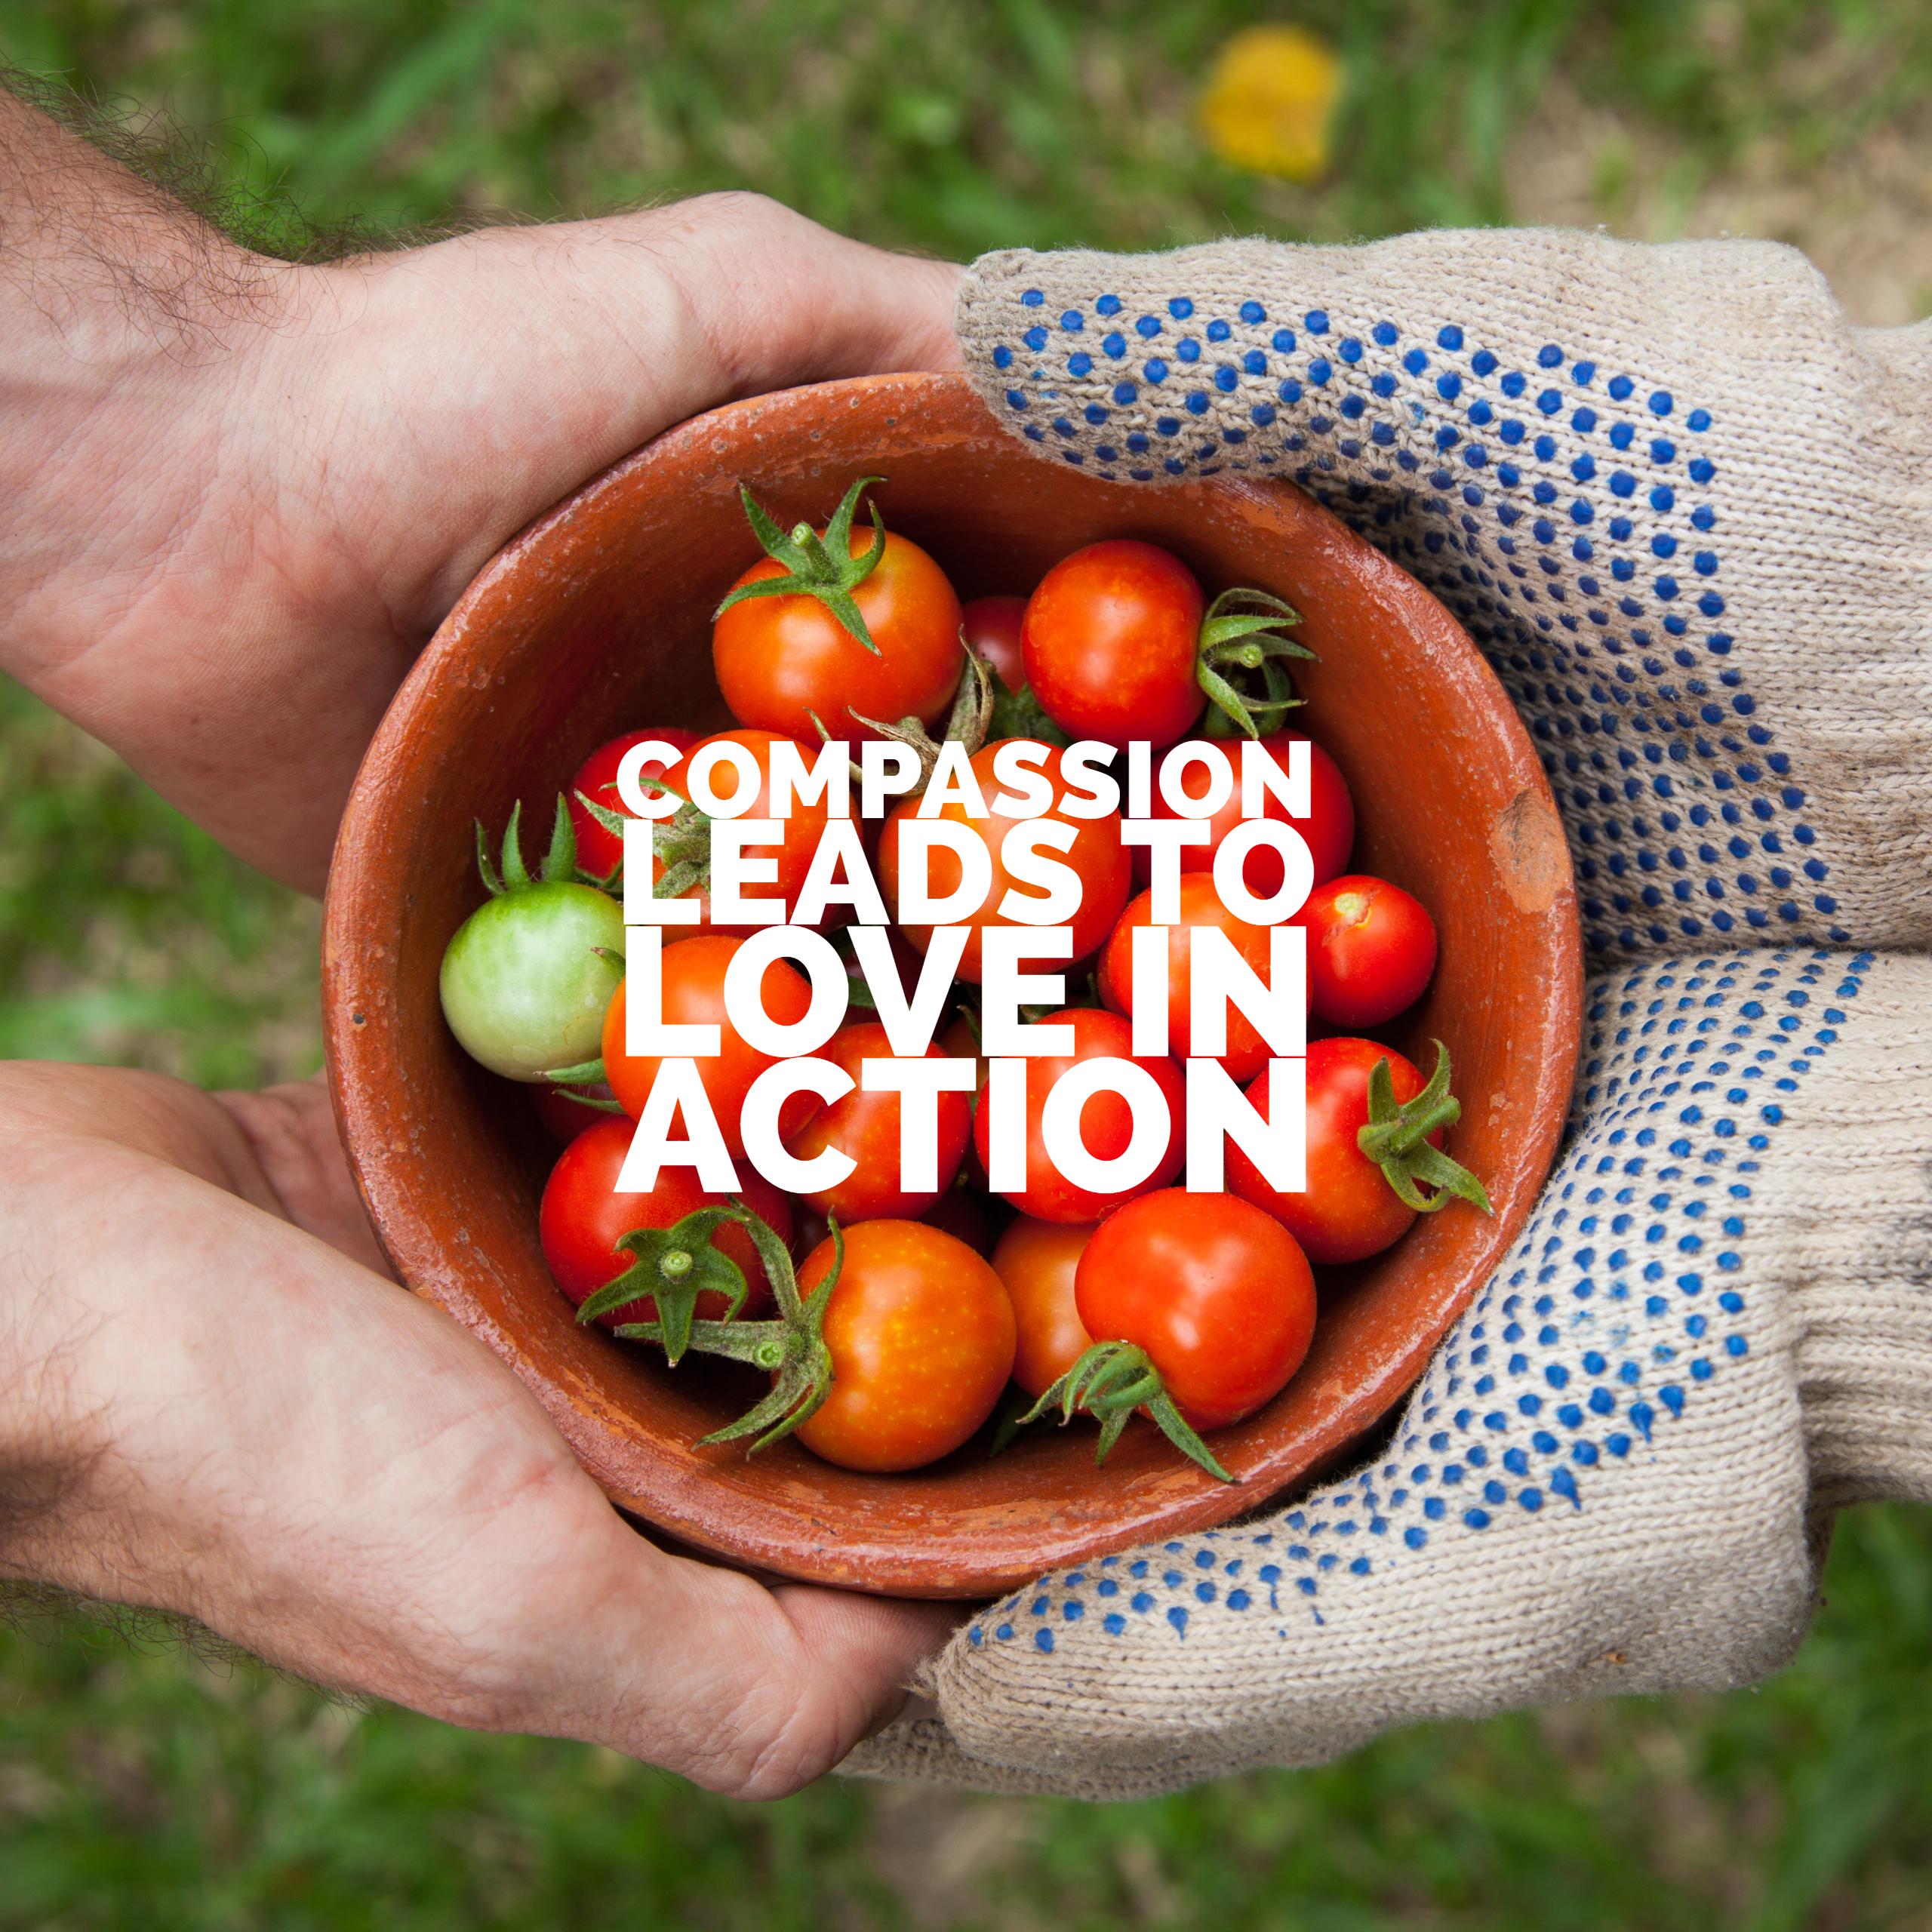 Compassion leads to love in action